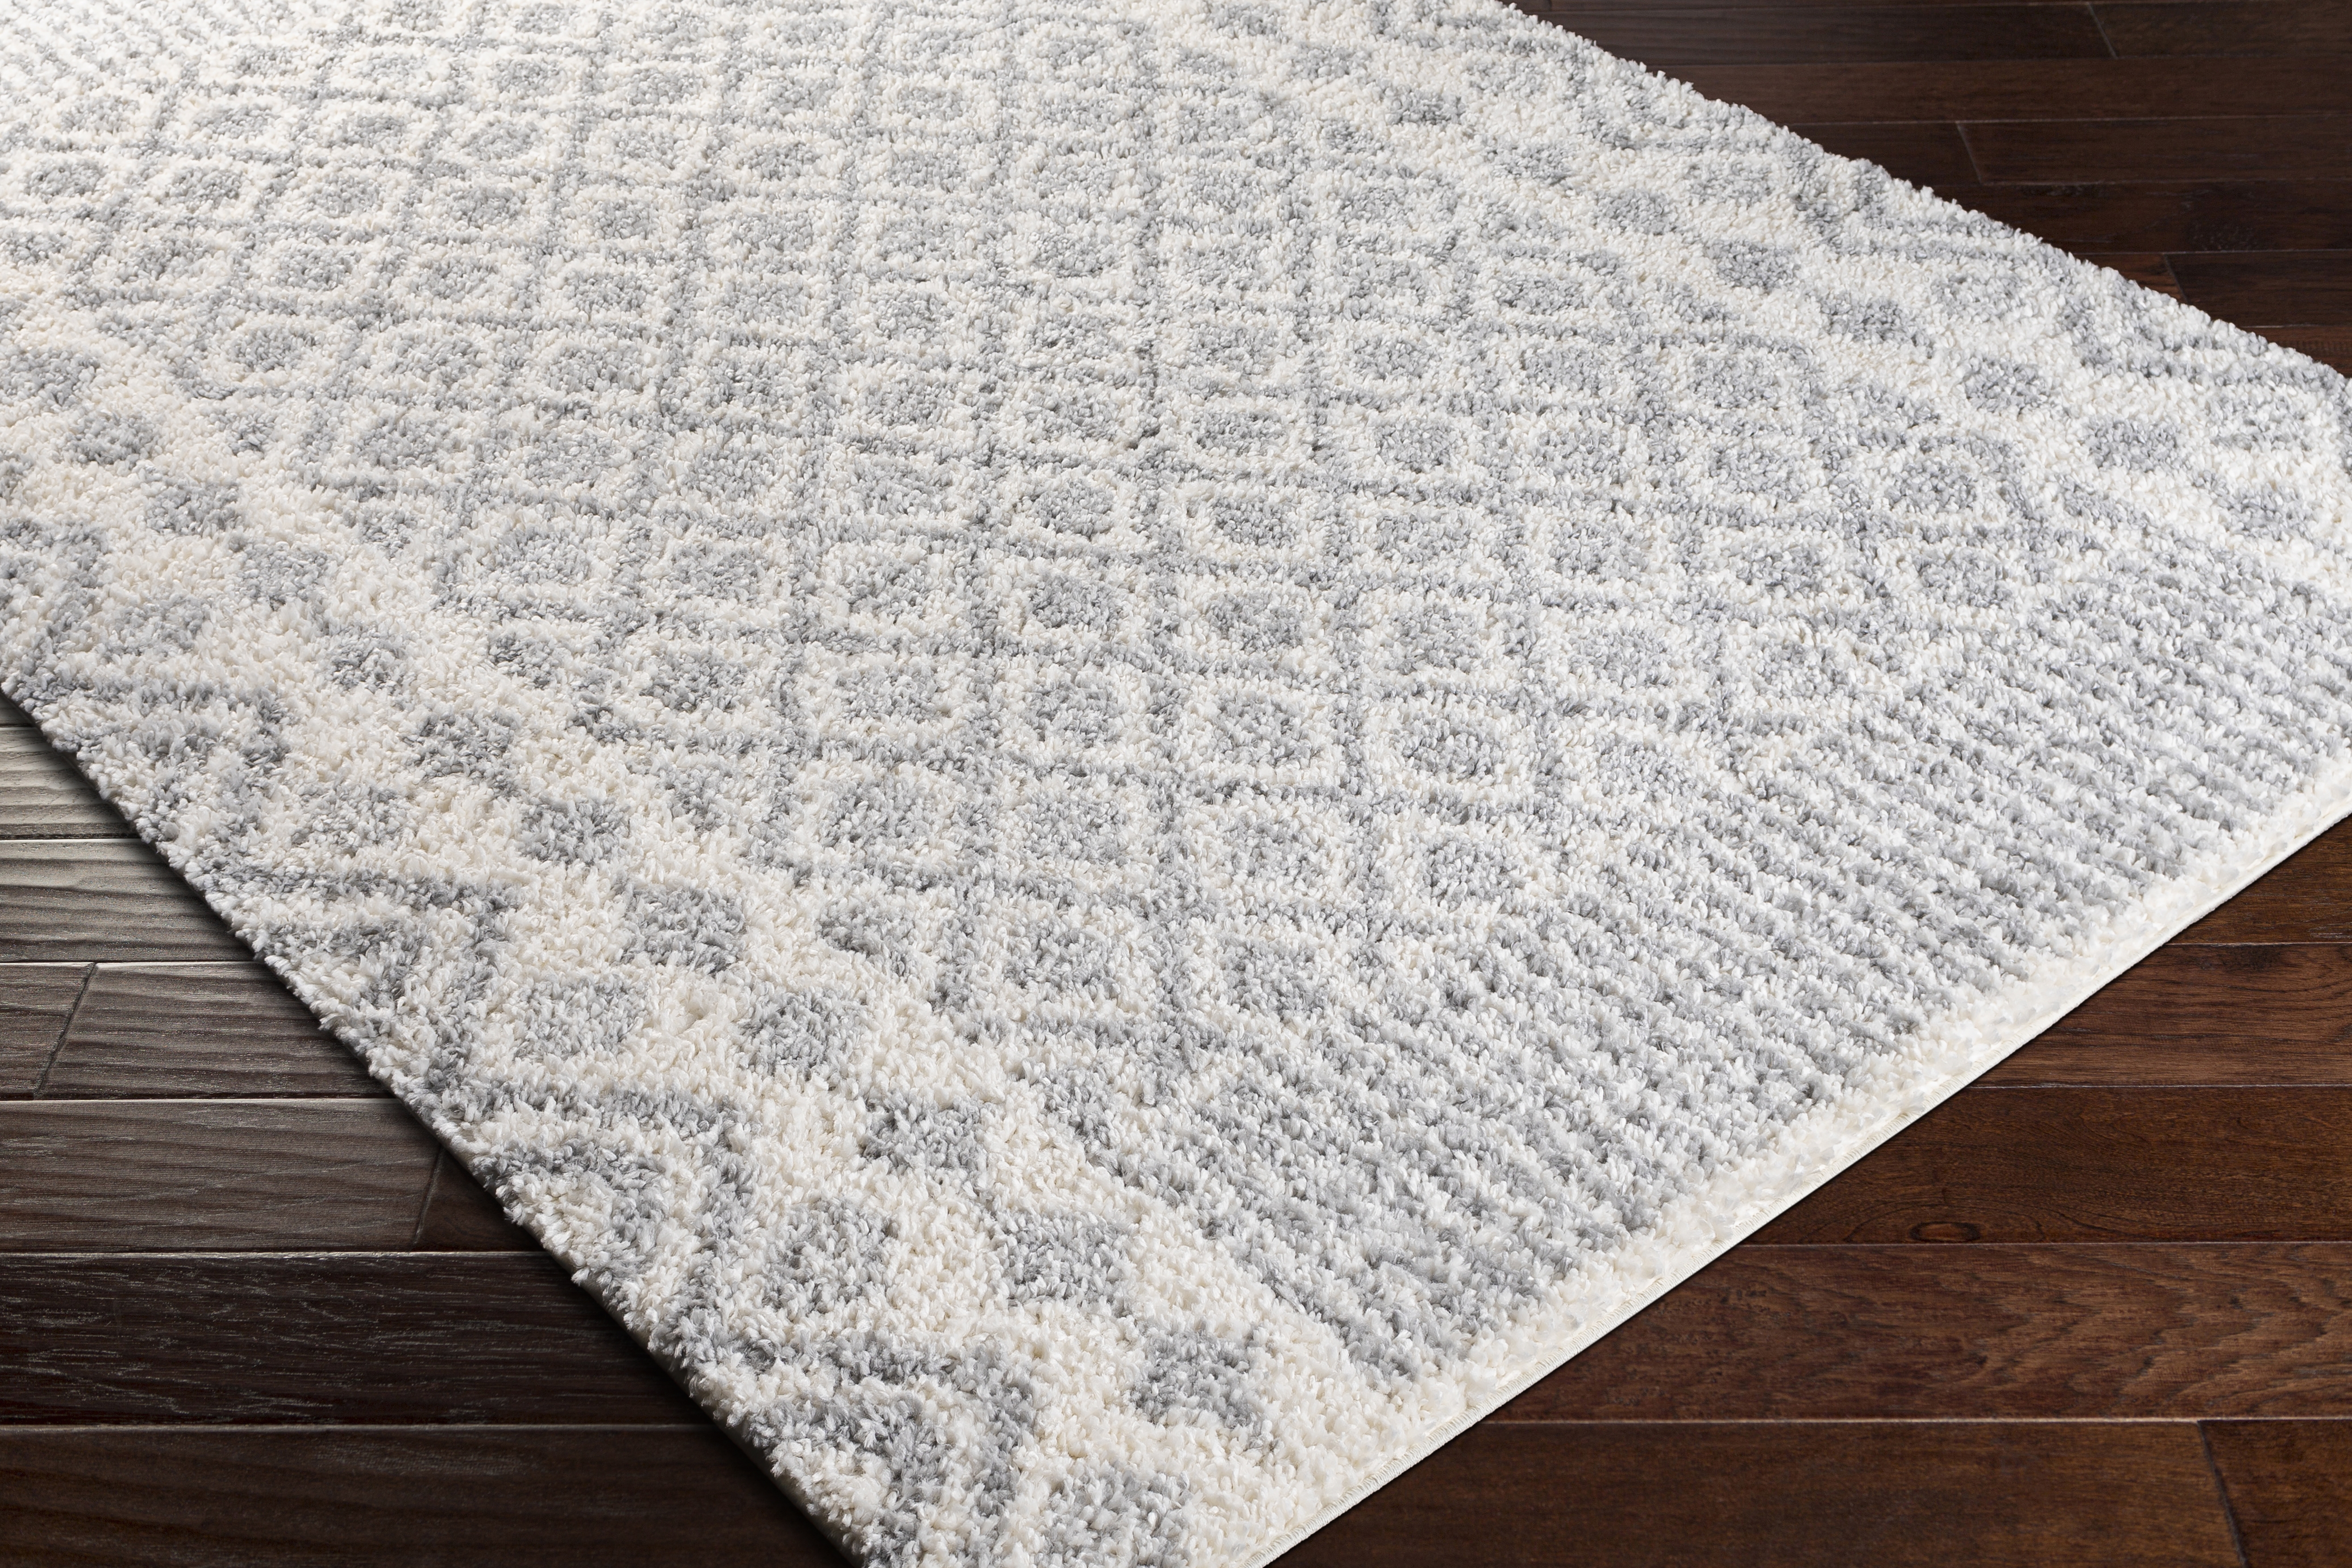 Deluxe Shag Rug, 5'3" x 7'3" - Image 6